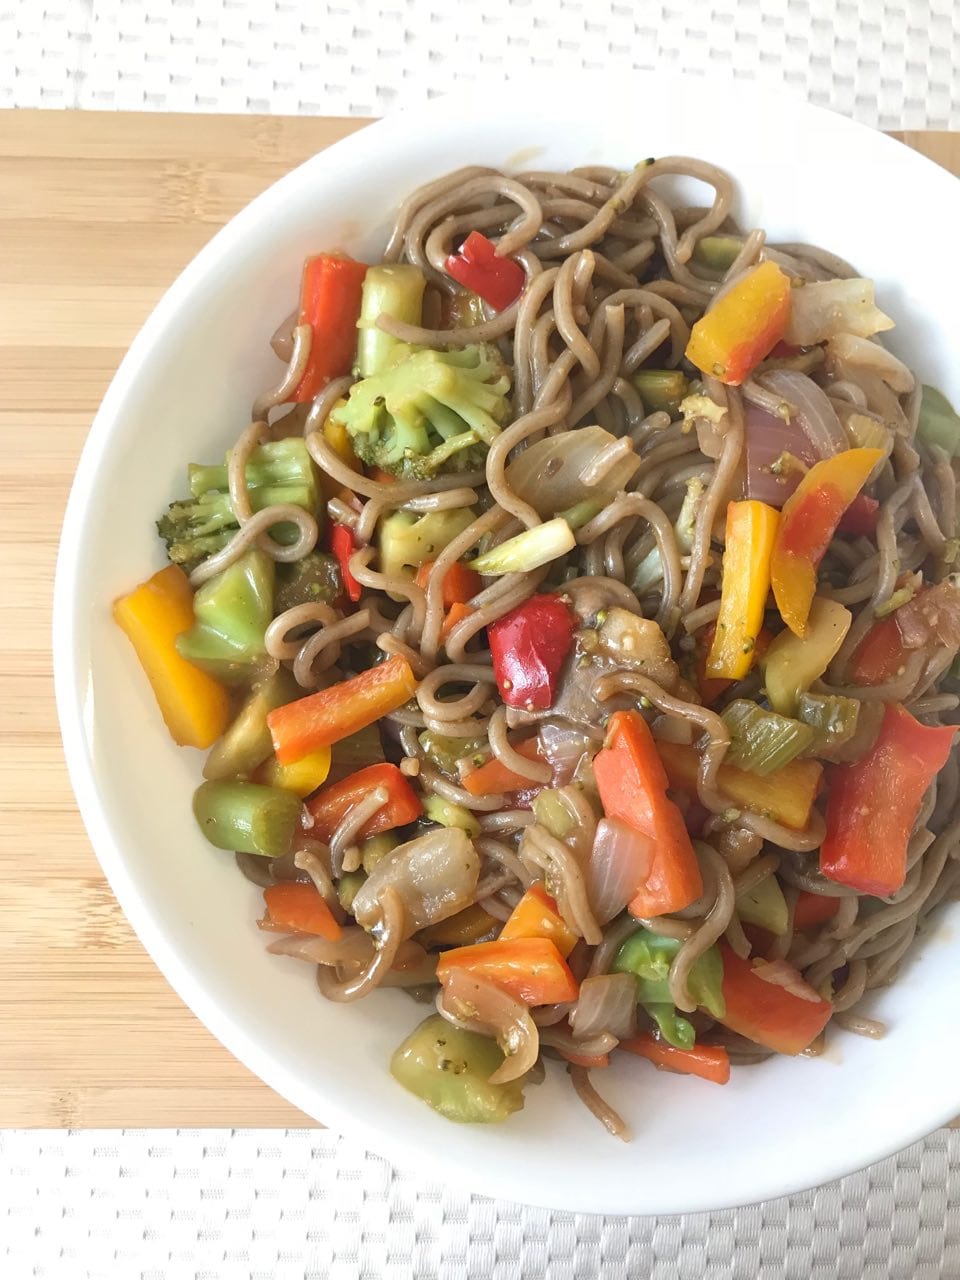 Bowl of vegetable stir fry on a cutting board